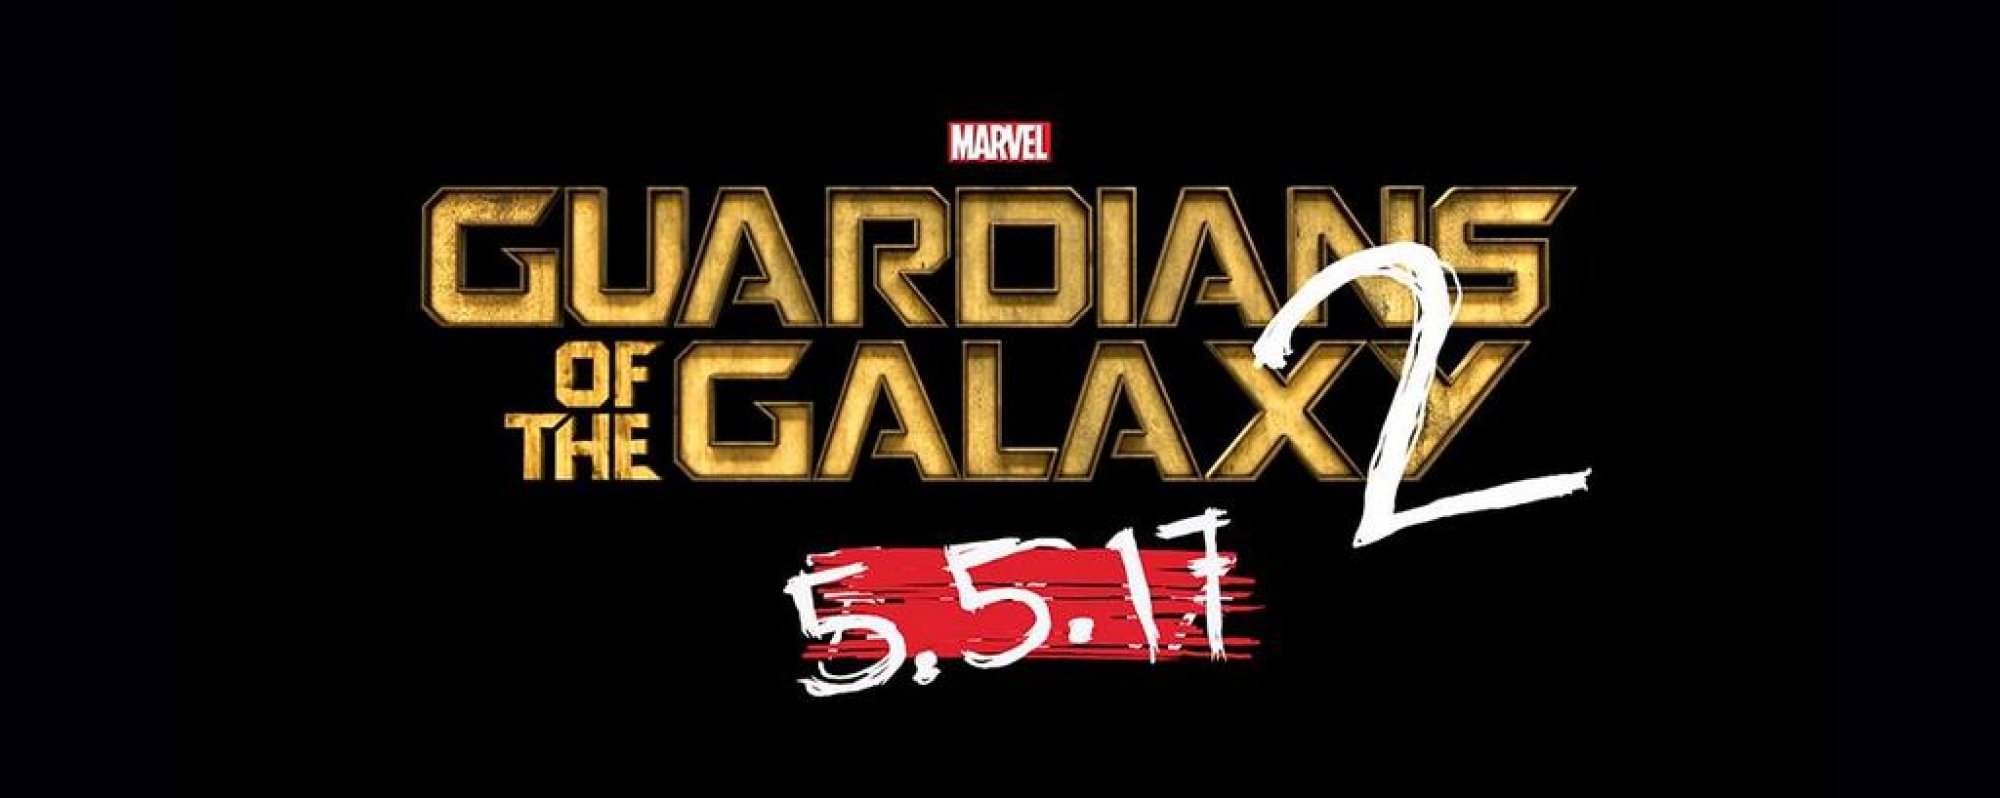 Here's Your Official Title for Guardians of the Galaxy 2